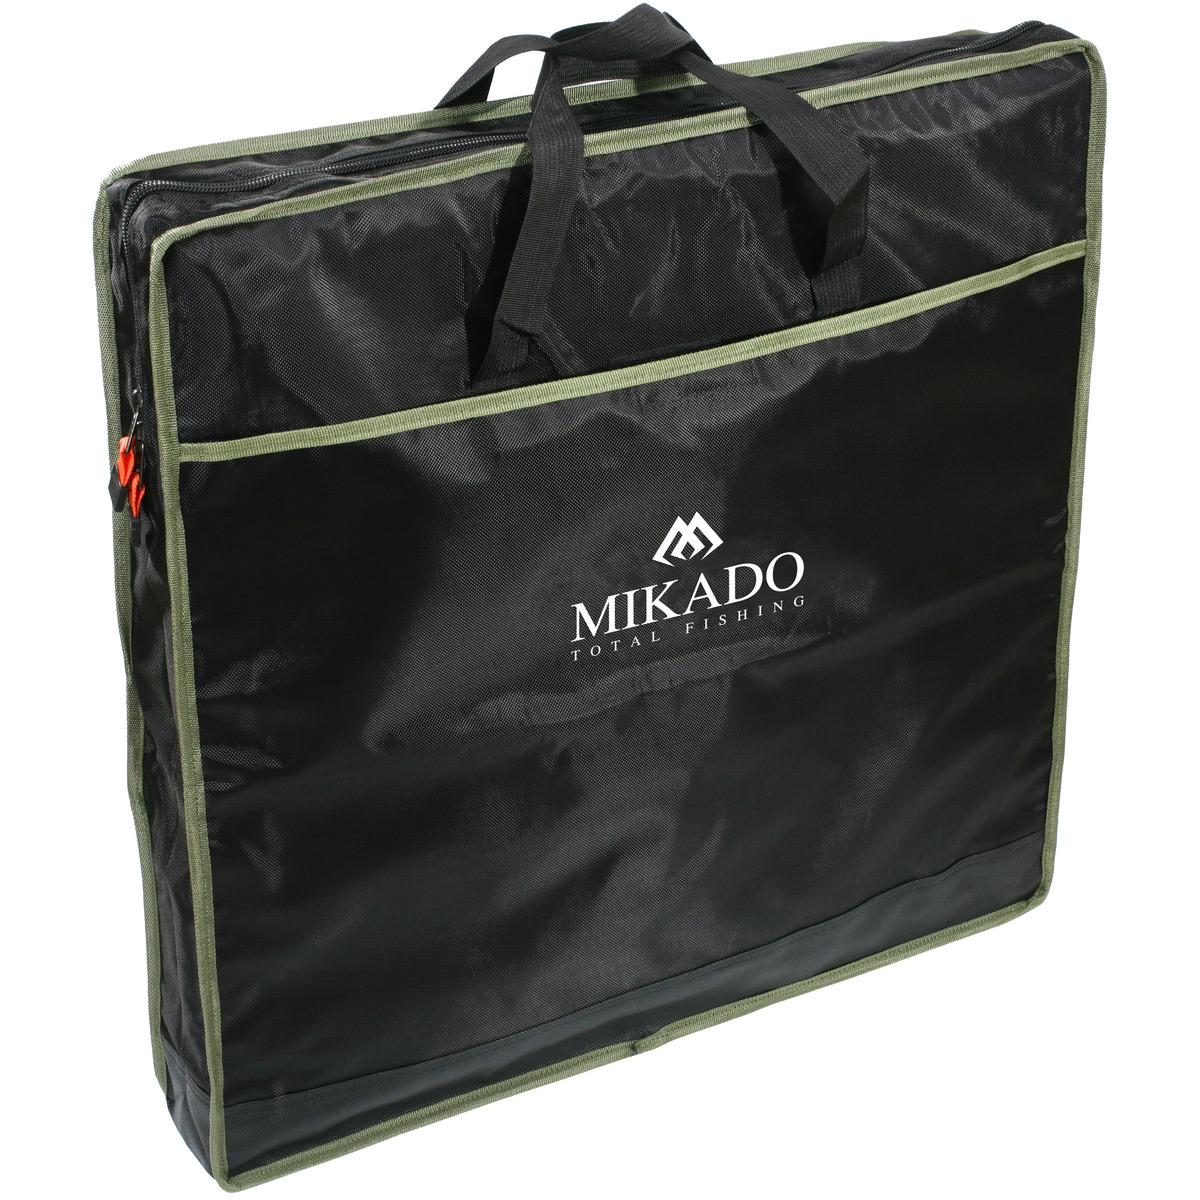 Mikado Bagfor Keepnets 1 Compartment - SQUARE (63x63x9 cm)  BLACK AND GREEN